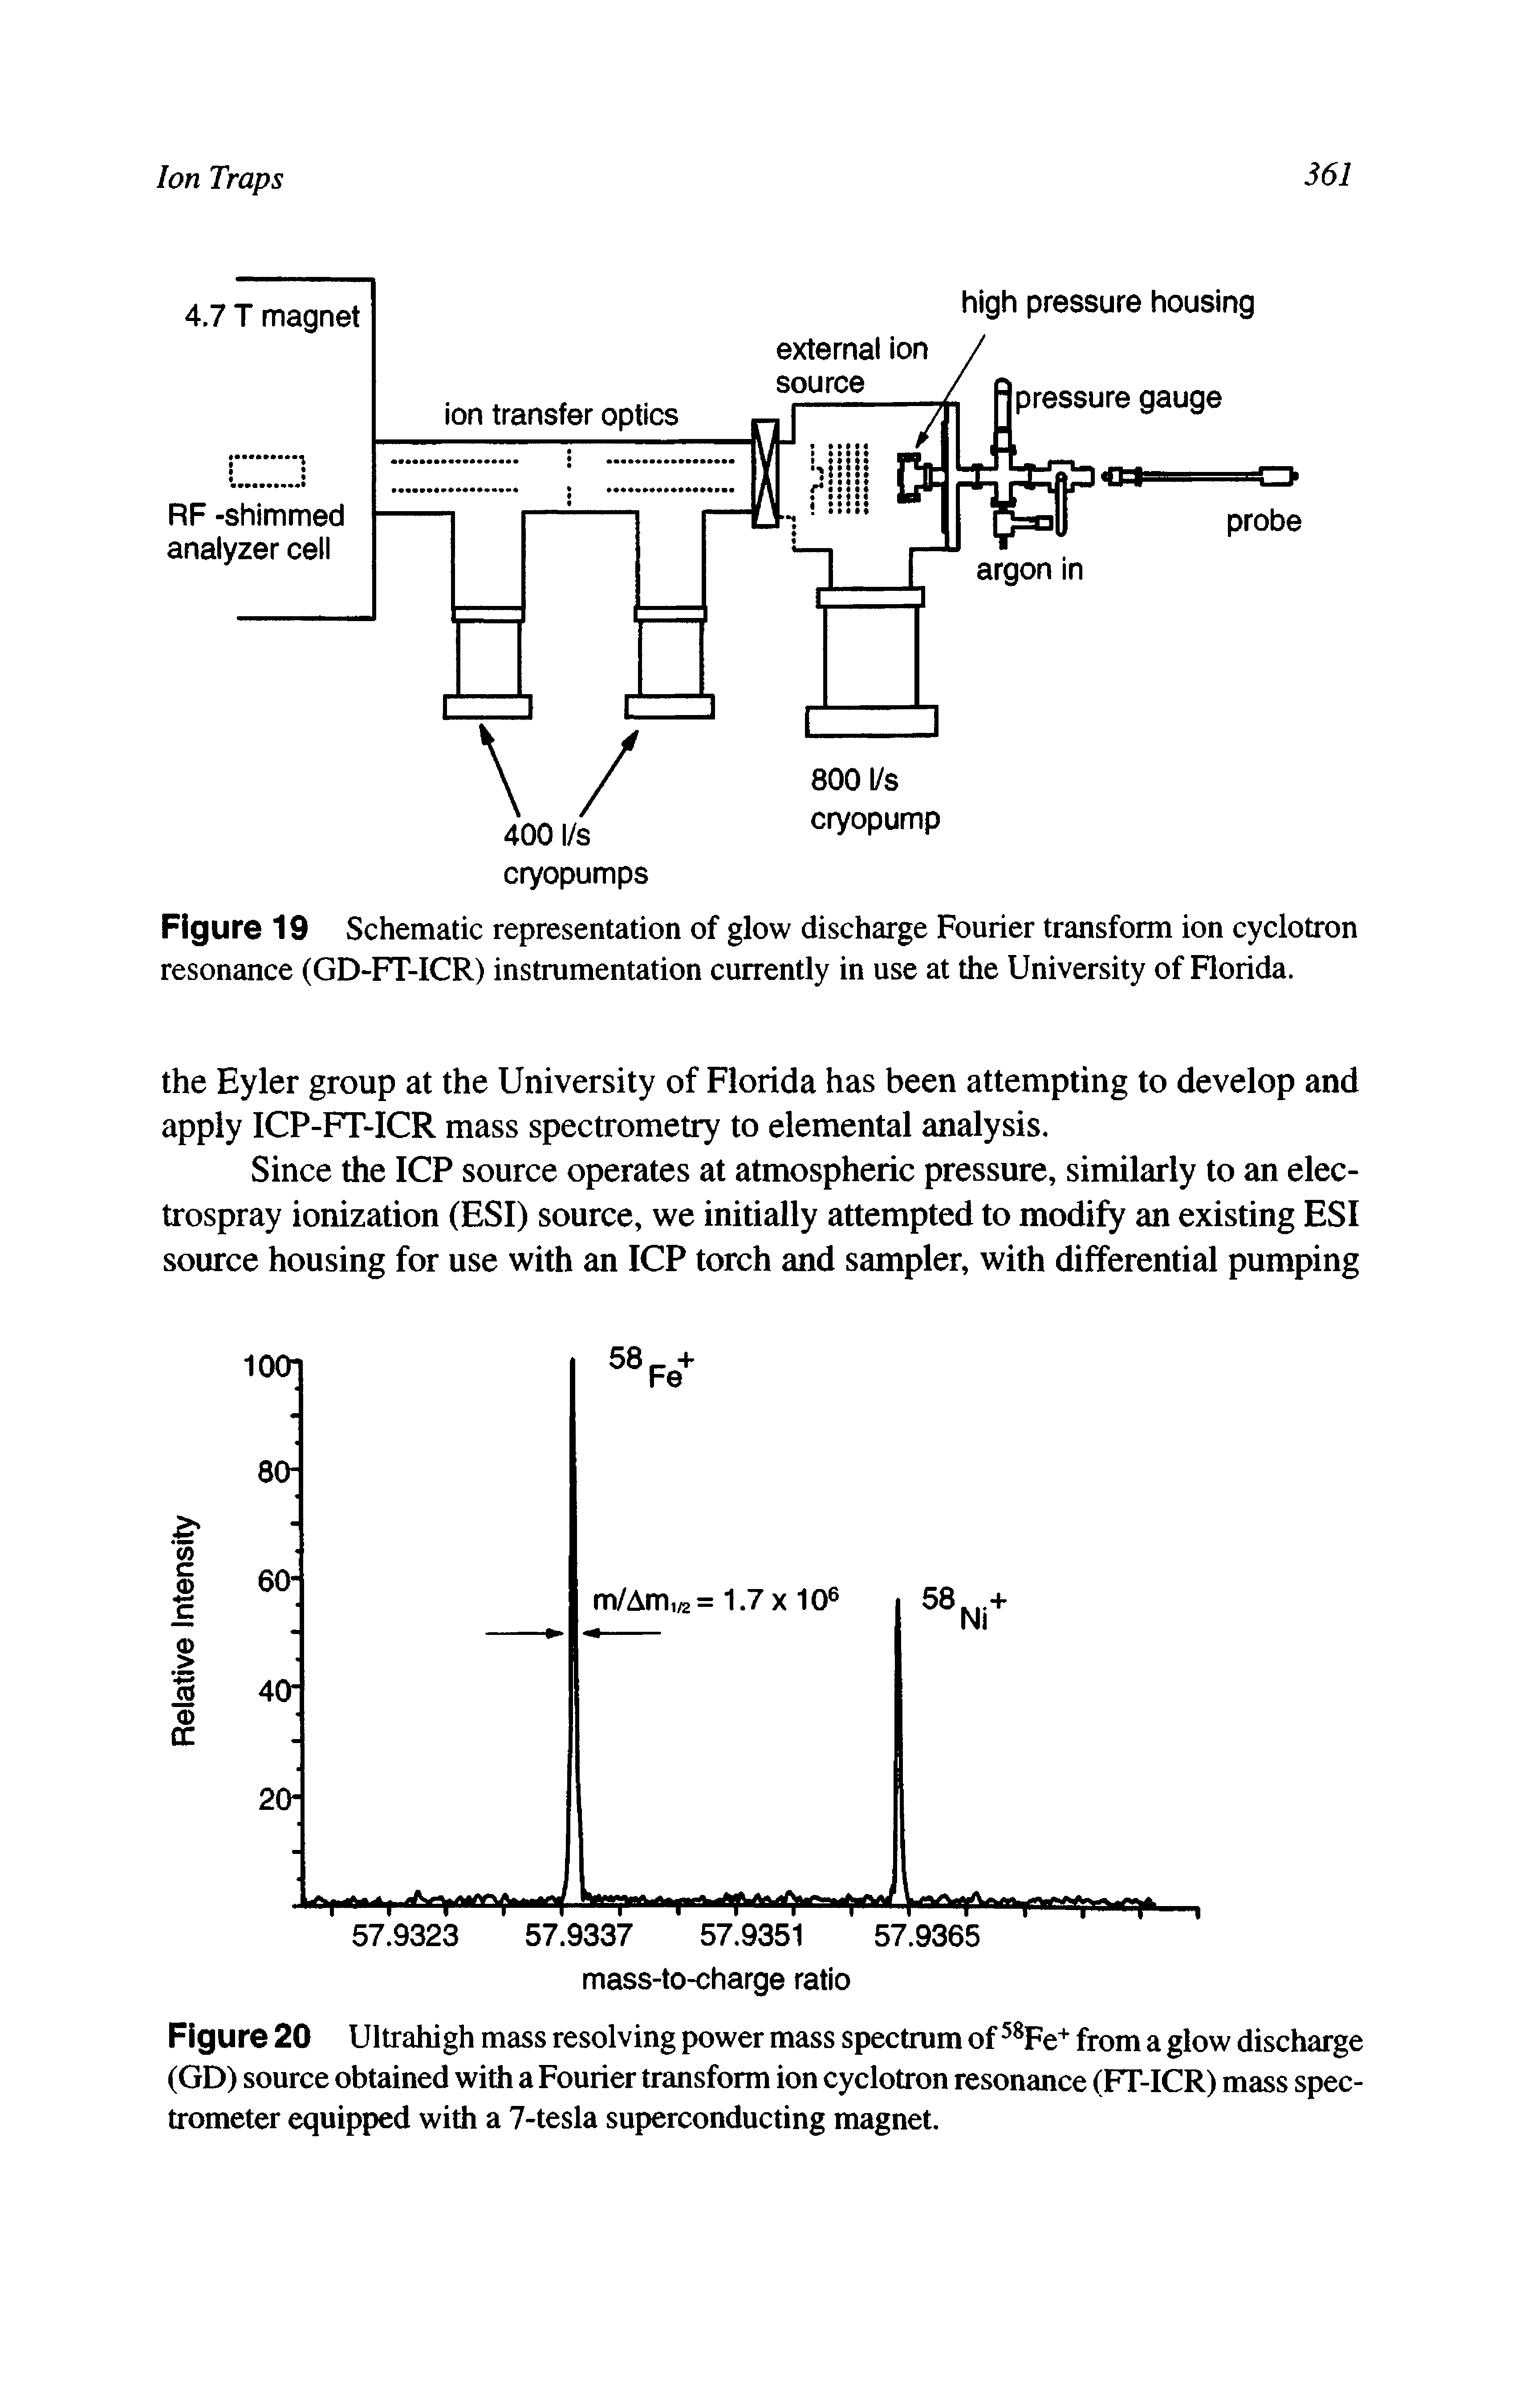 Figure 20 Ultrahigh mass resolving power mass spectrum of 58Fe+ from a glow discharge (GD) source obtained with a Fourier transform ion cyclotron resonance (FT-ICR) mass spectrometer equipped with a 7-tesla superconducting magnet.